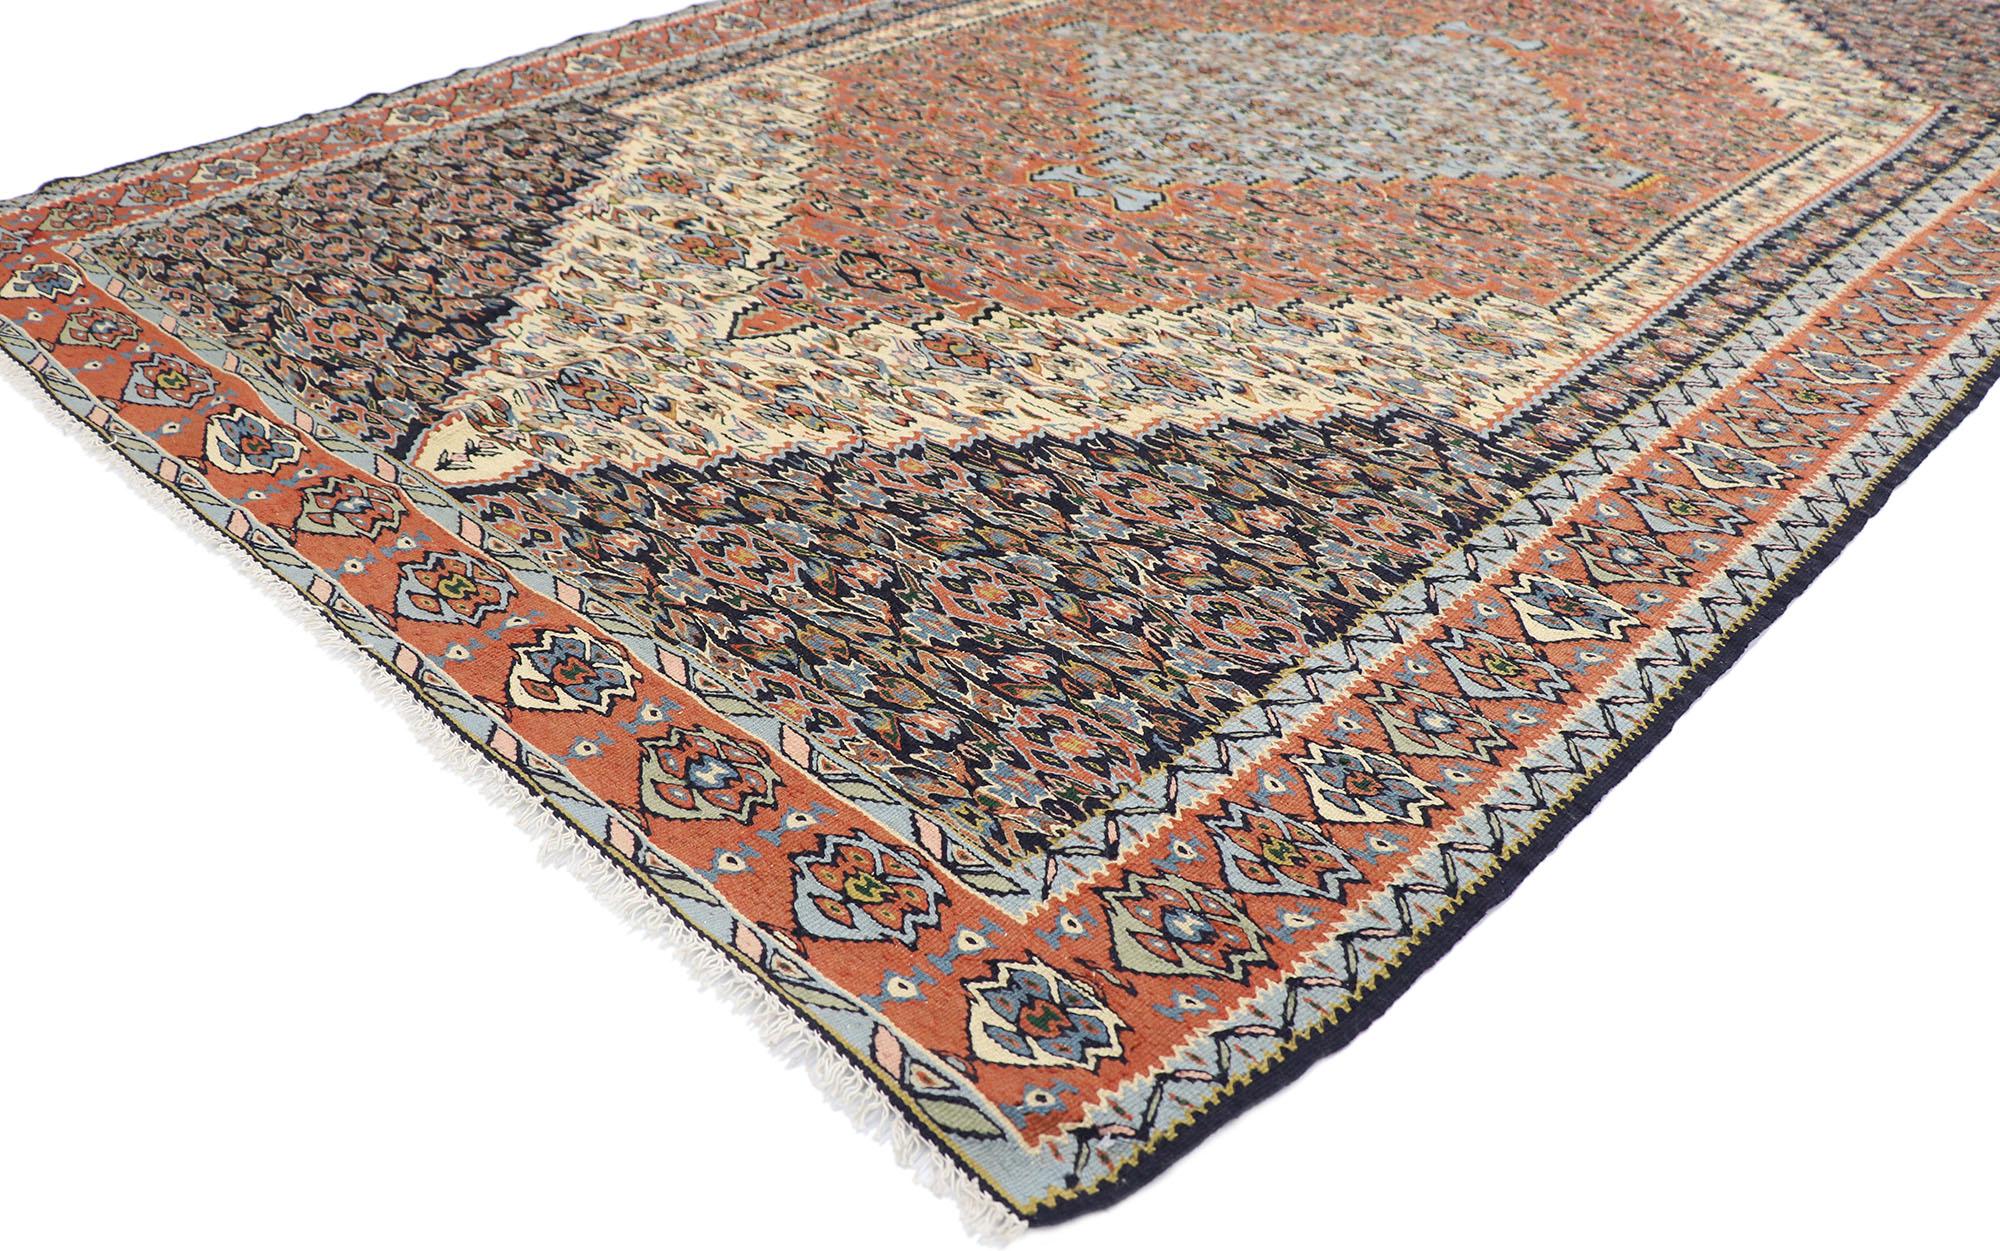 77929 Vintage Persian Senneh Kilim rug with Farmhouse Cottage Style 05'03 x 08'01. Effortless beauty and simplicity, this hand-woven wool vintage Persian Senneh kilim rug gives a lively and light hearted feel with its bucolic charm. The abrashed